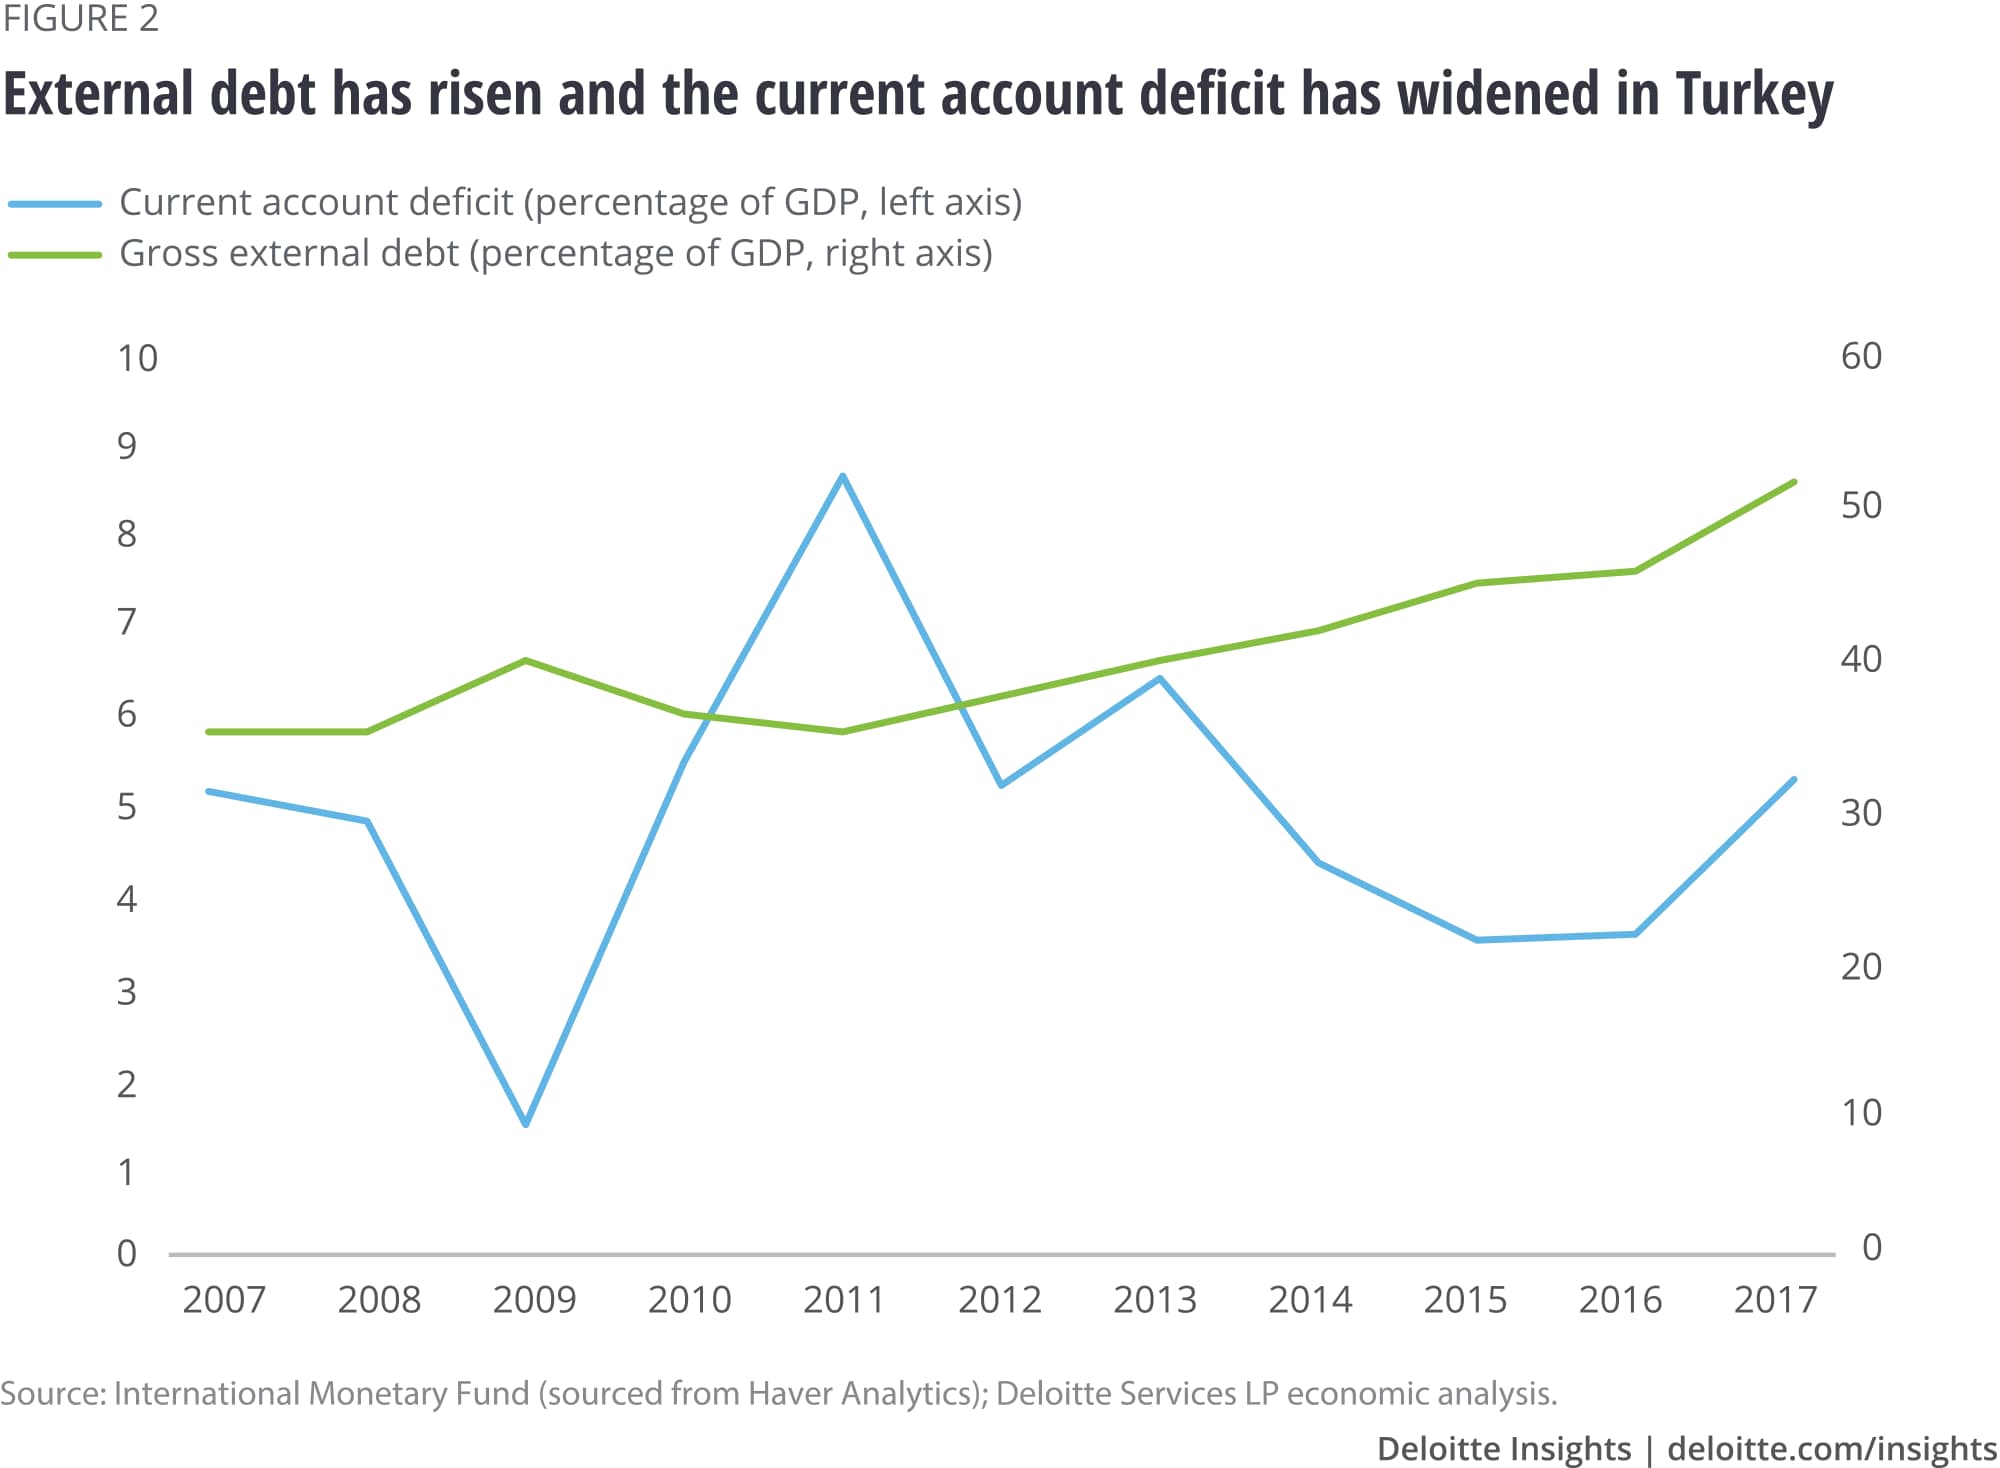 External debt has risen and the current account deficit has widened in Turkey